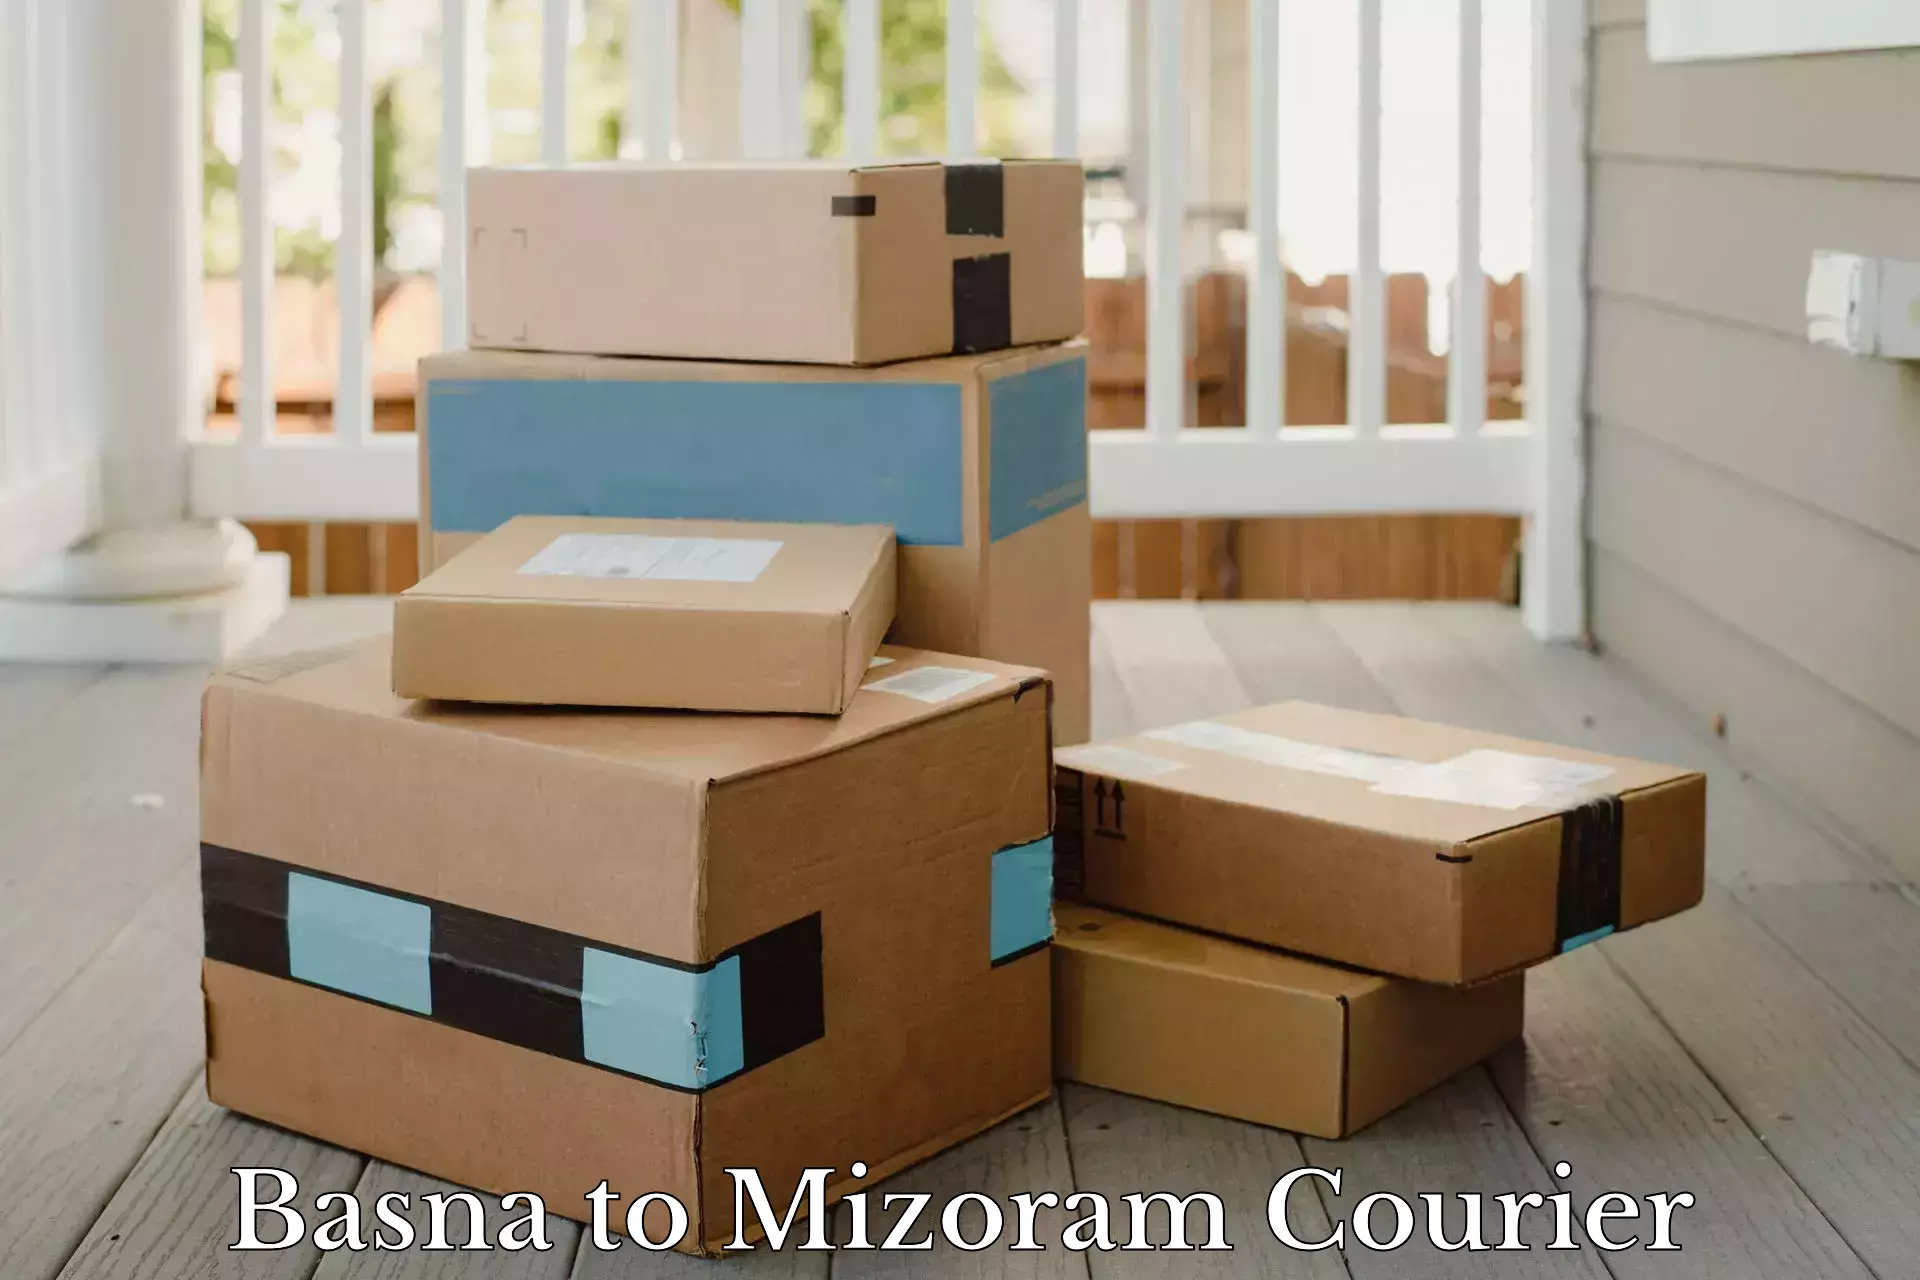 Online package tracking Basna to Mizoram